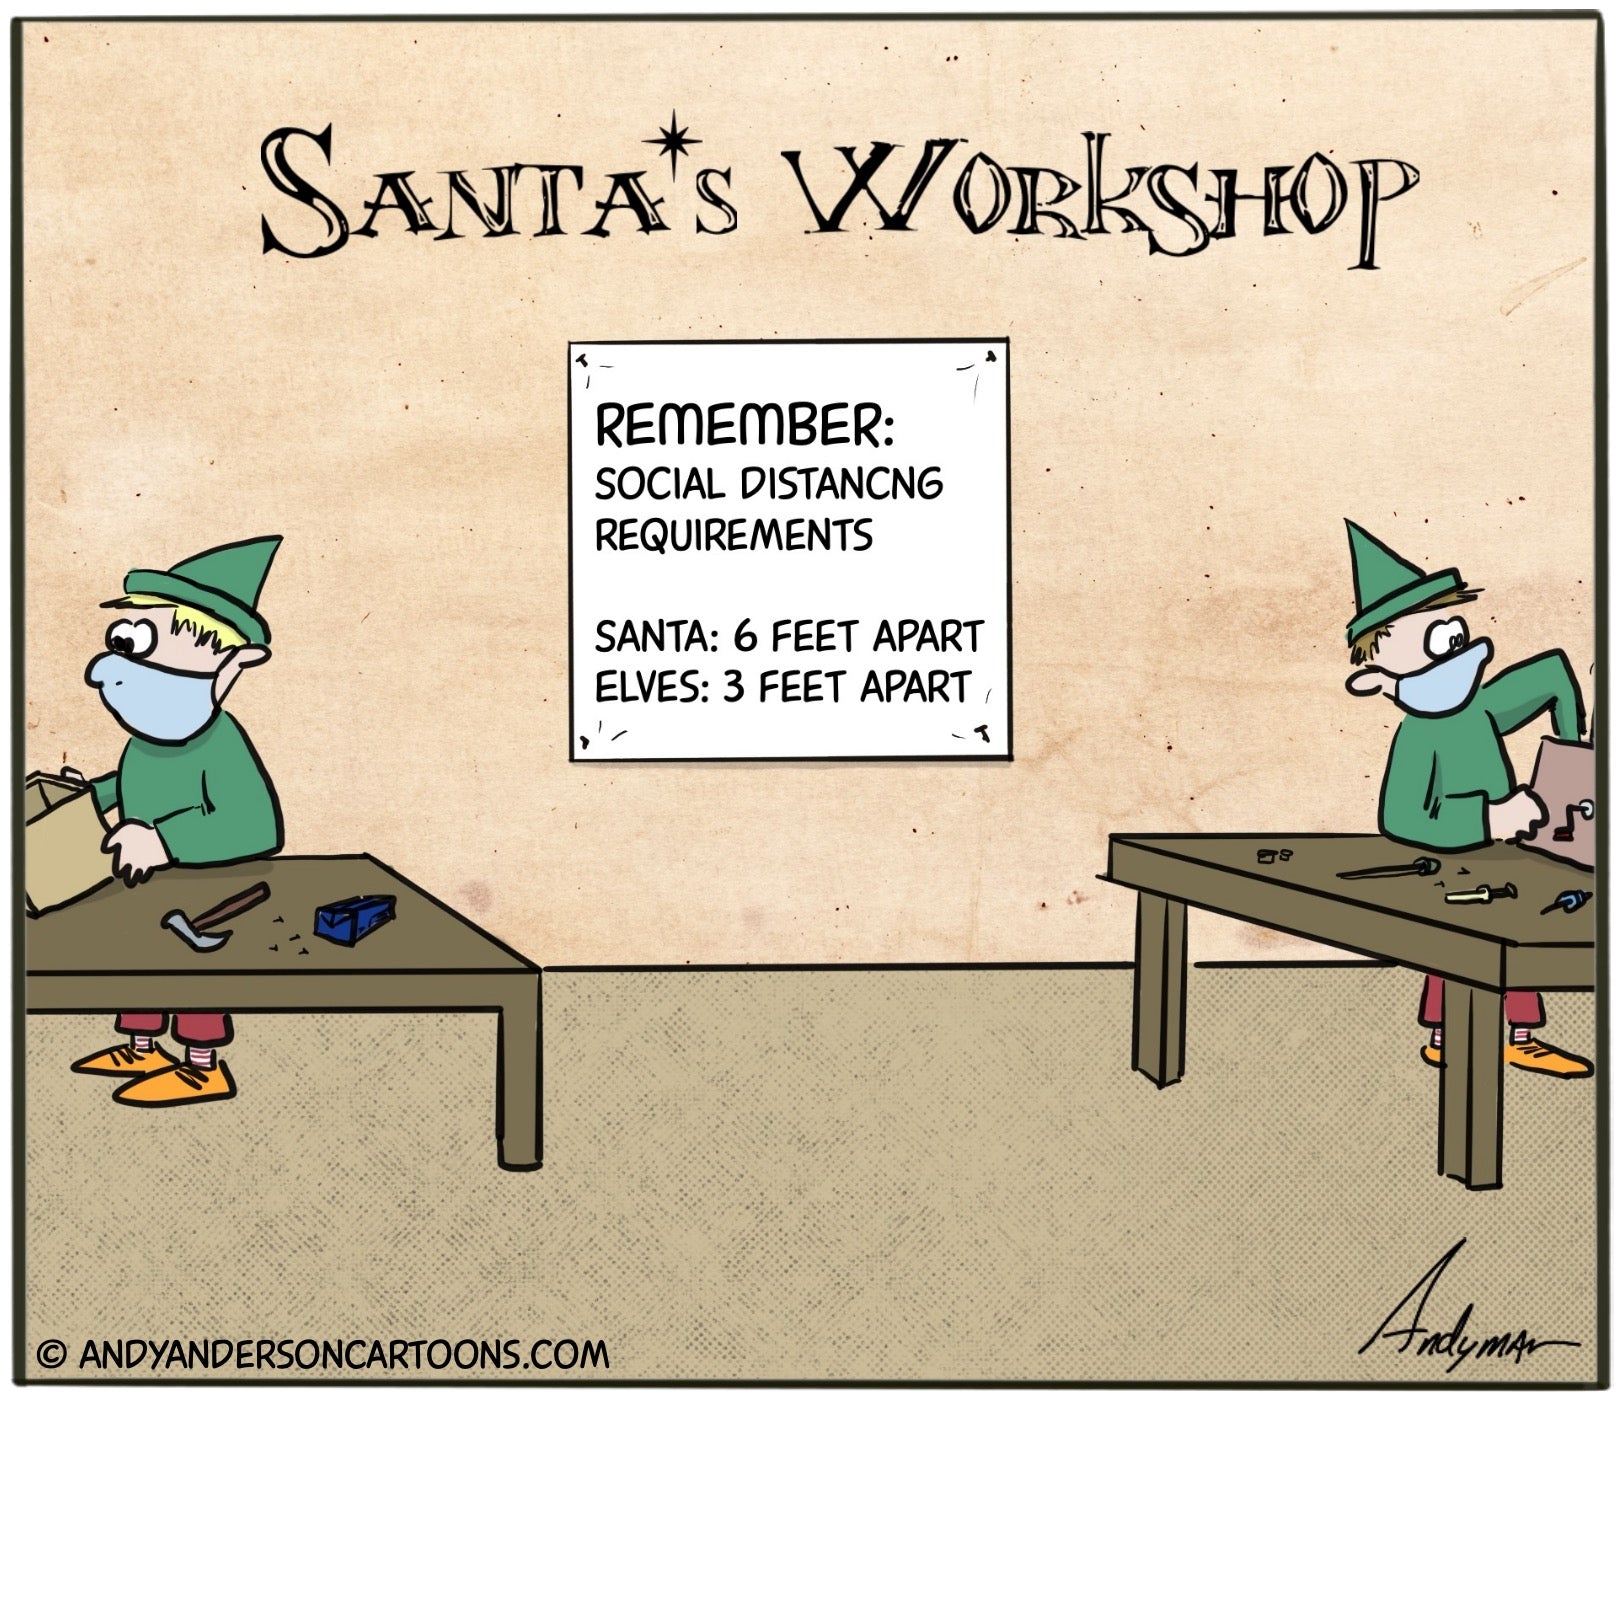 Cartoon about elves maintaining 3 feet of social distance instead of the standard 6